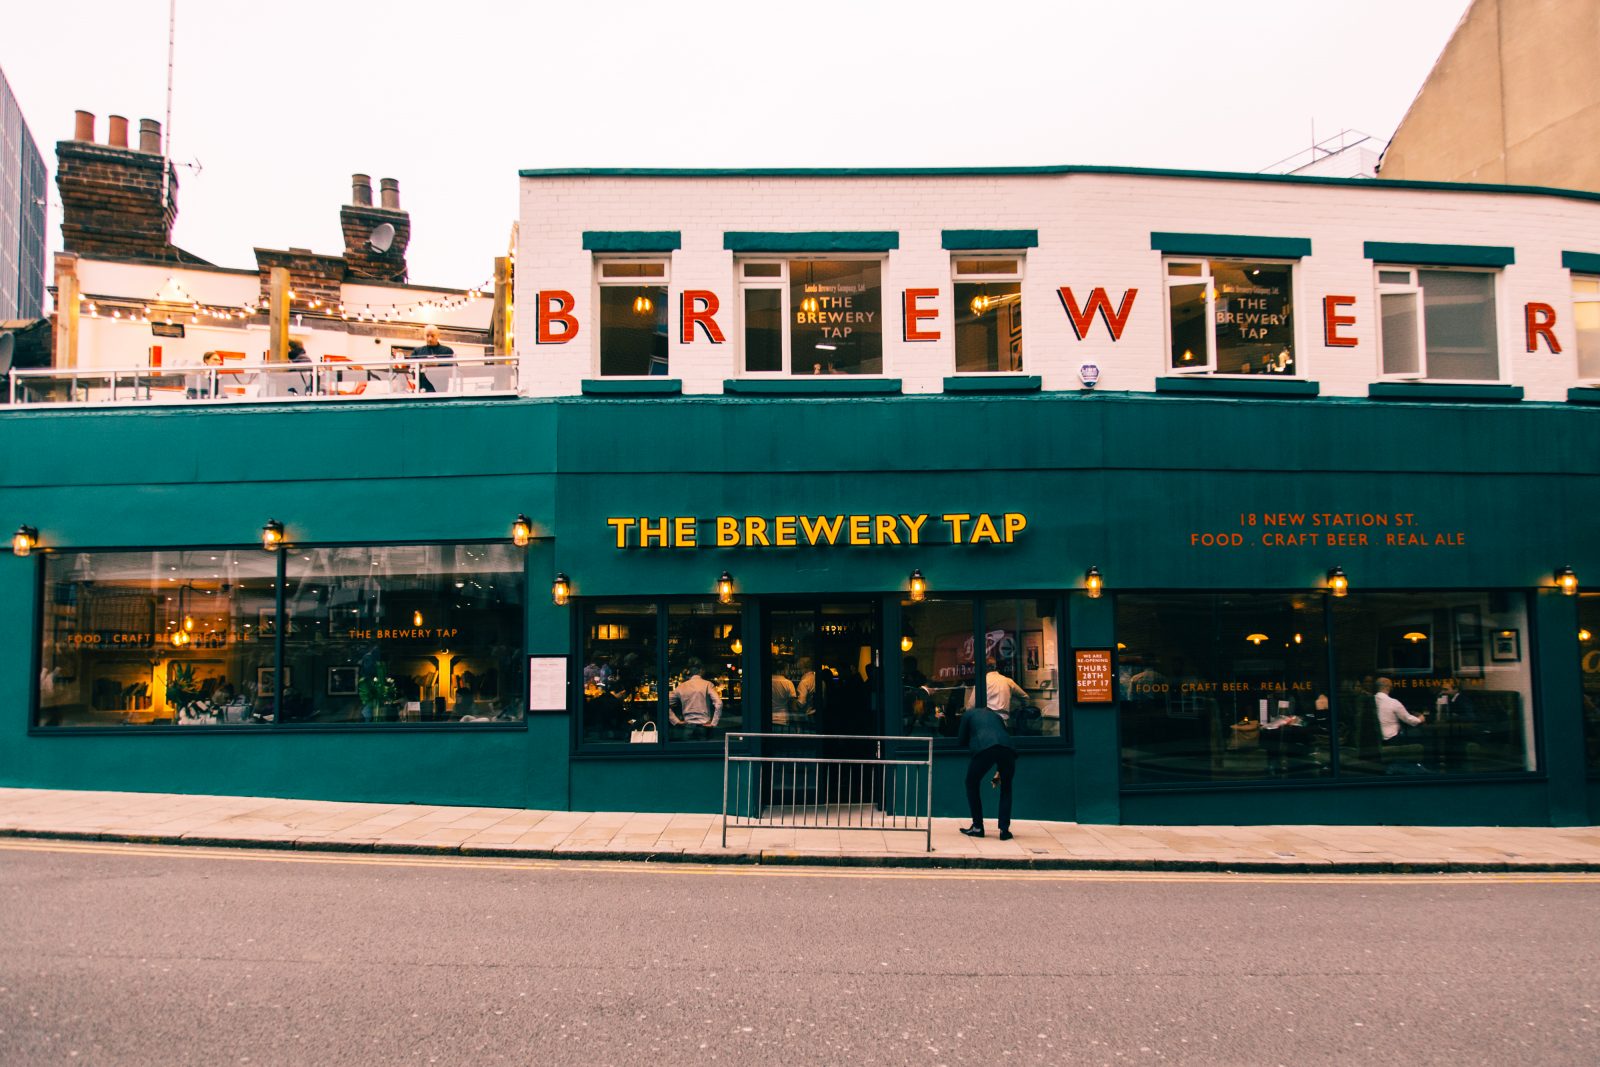 outside of bar with sign 'The Brewery Tap' in yellow letters.